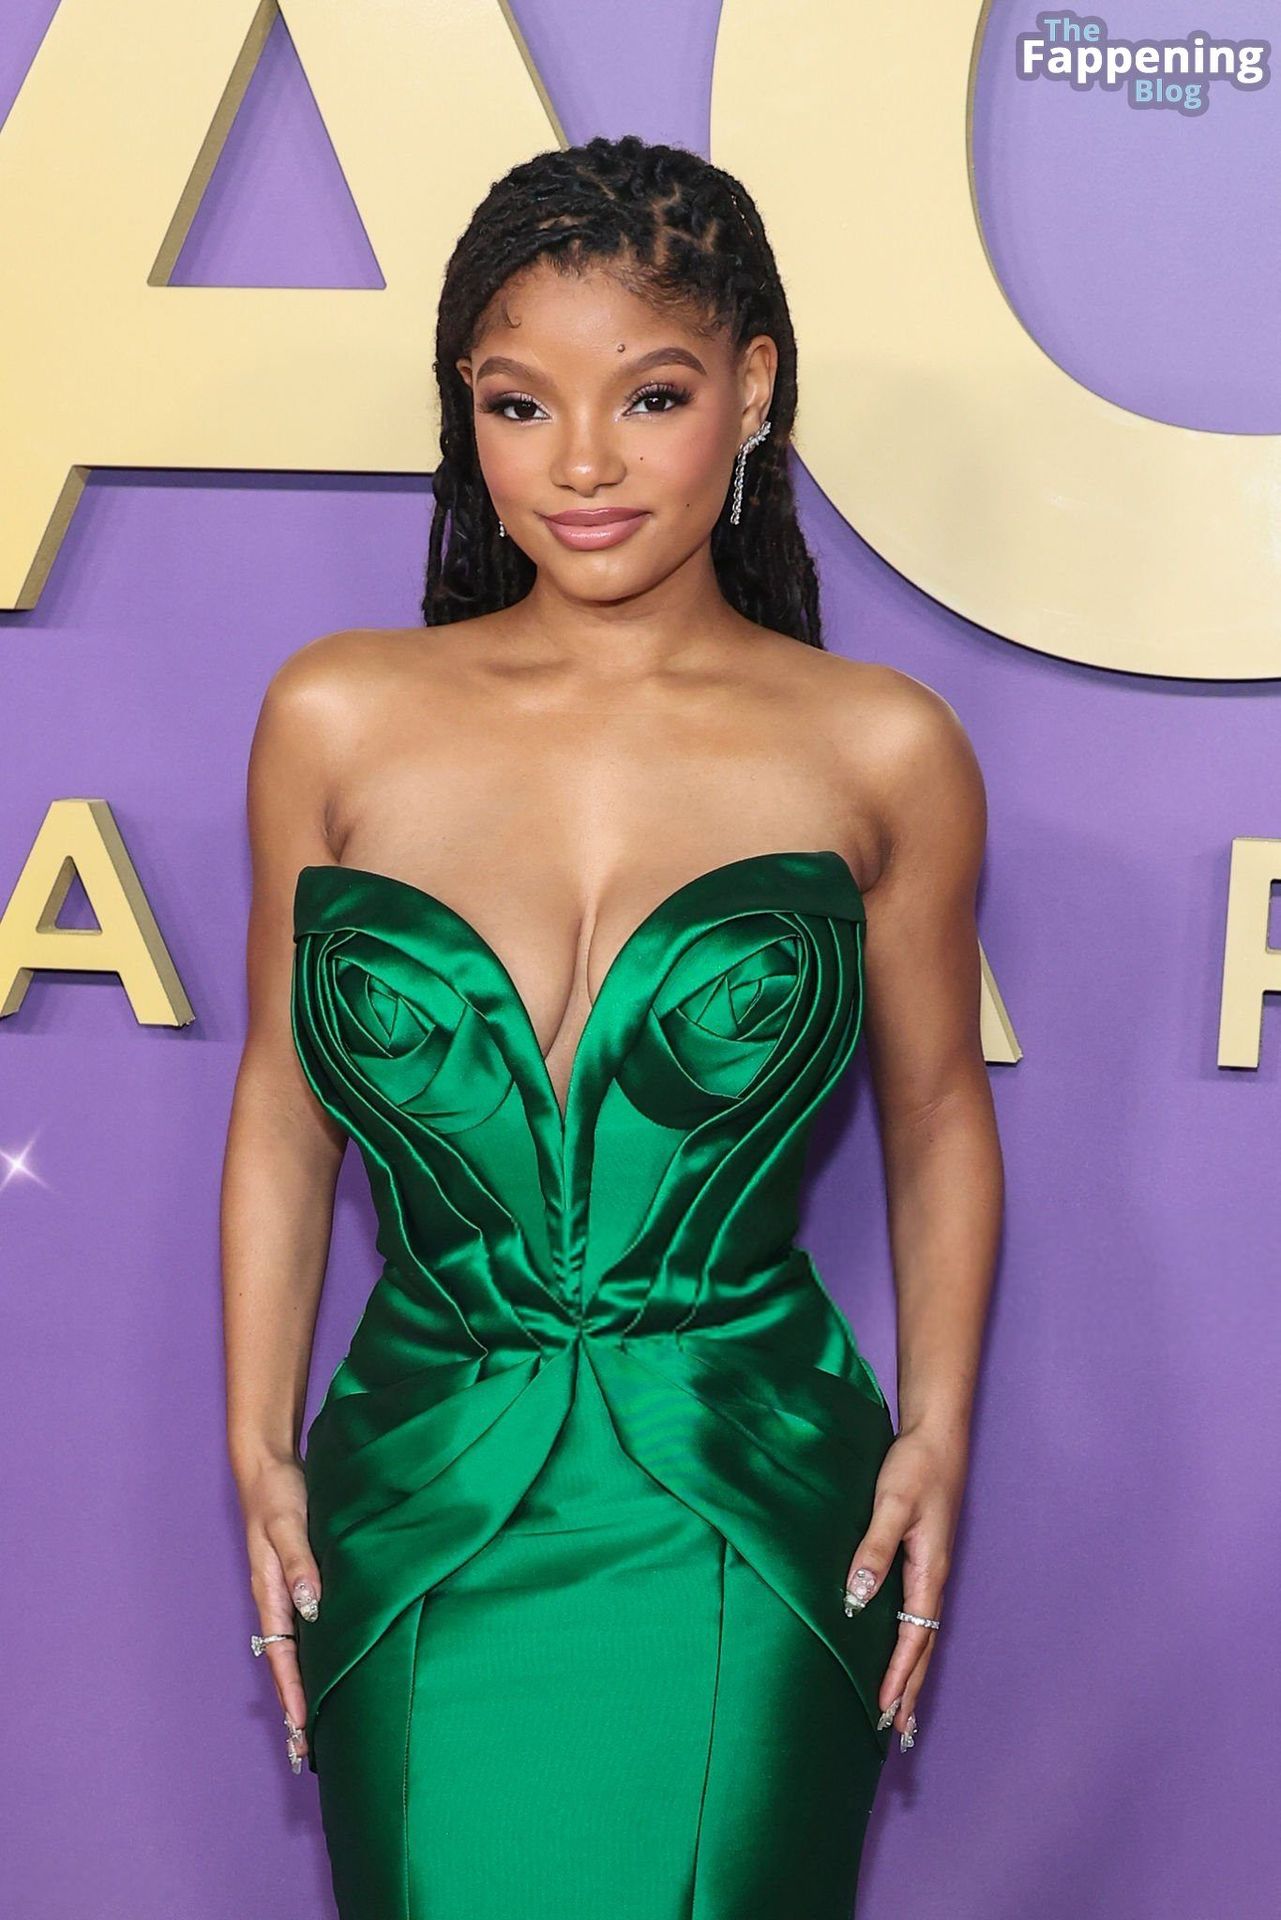 Halle Bailey Displays Her Sexy Boobs at the 55th NAACP Image Awards (62 Photos)